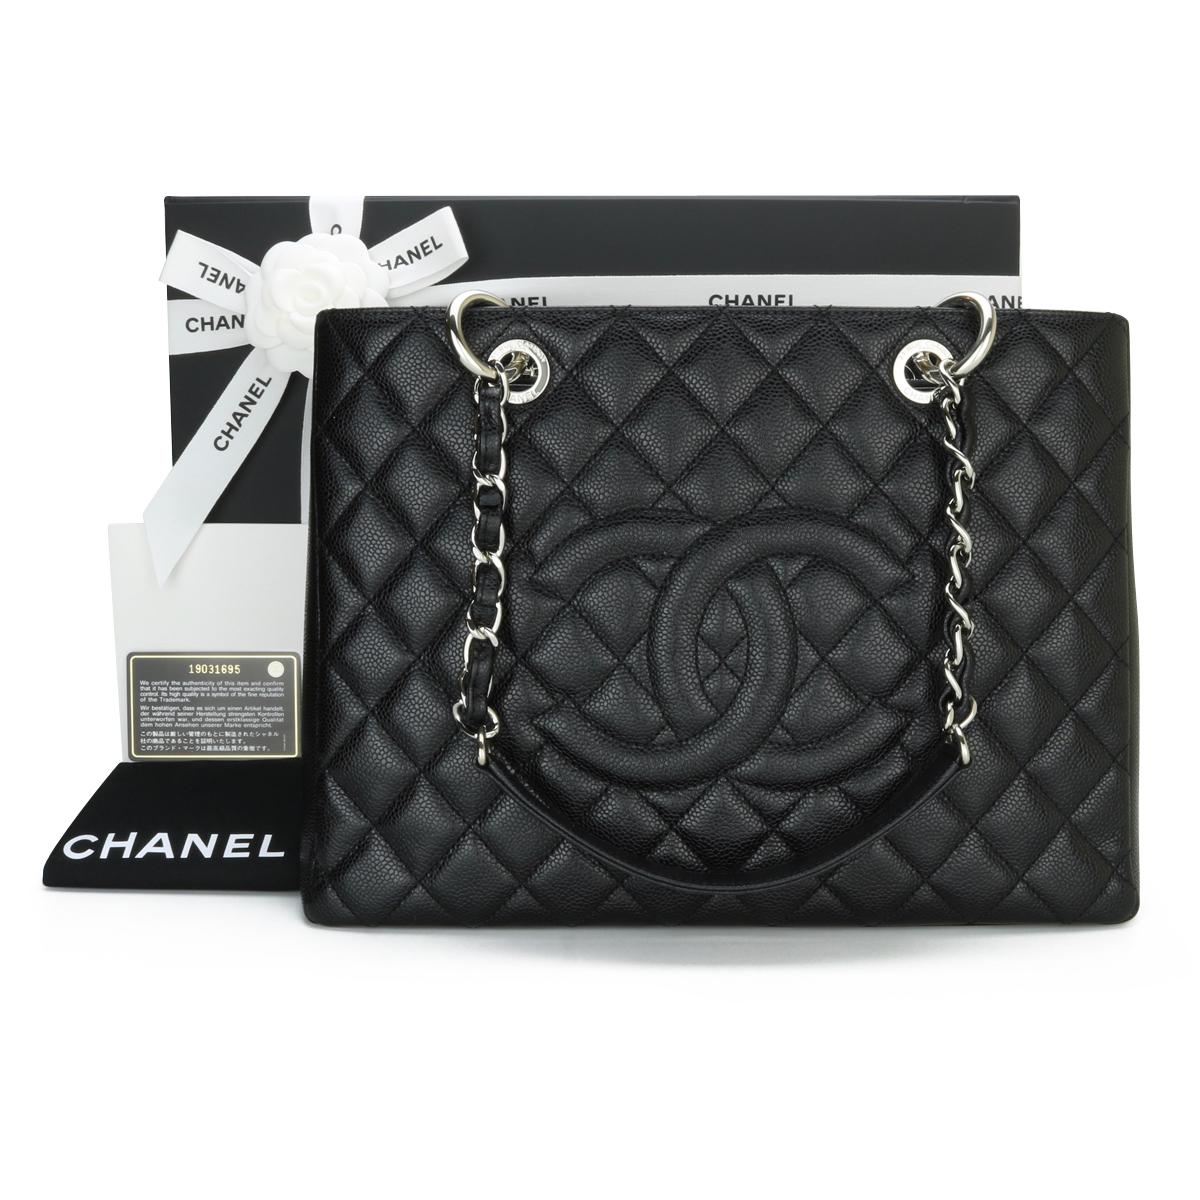 CHANEL Grand Shopping Tote (GST) Black Caviar with Silver Hardware 2015.

This bag is in excellent condition, the bag still holds its shape very well, and the hardware is still very shiny.

As Chanel has discontinued the Grand Shopping Tote (GST),